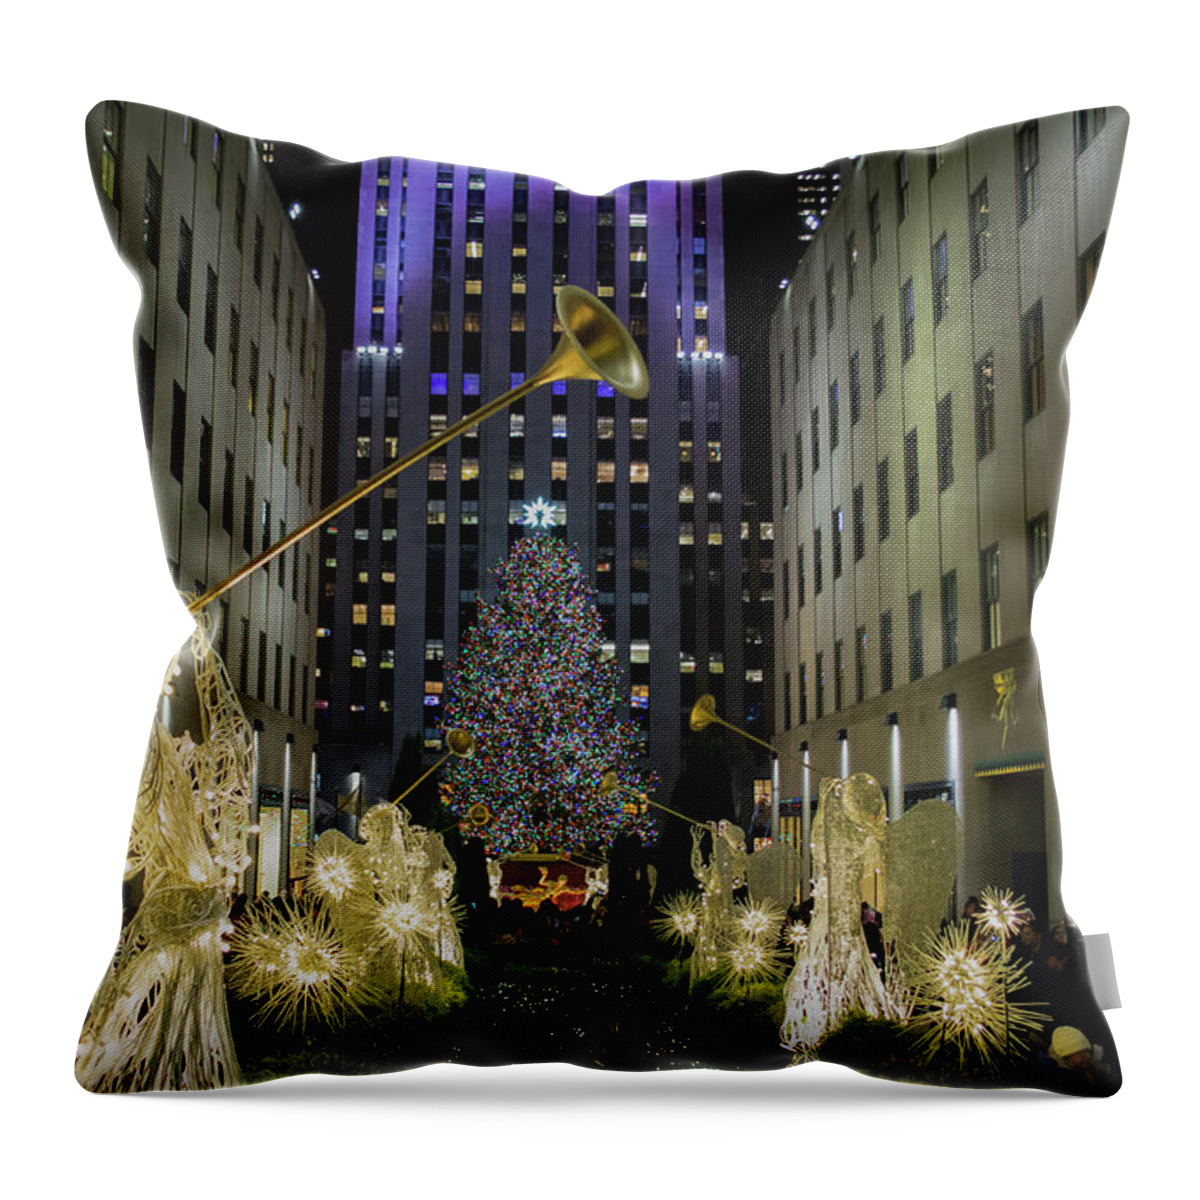 The Tree At Rockefeller Plaza Throw Pillow featuring the photograph The Tree At Rockefeller Plaza by Kenneth Cole